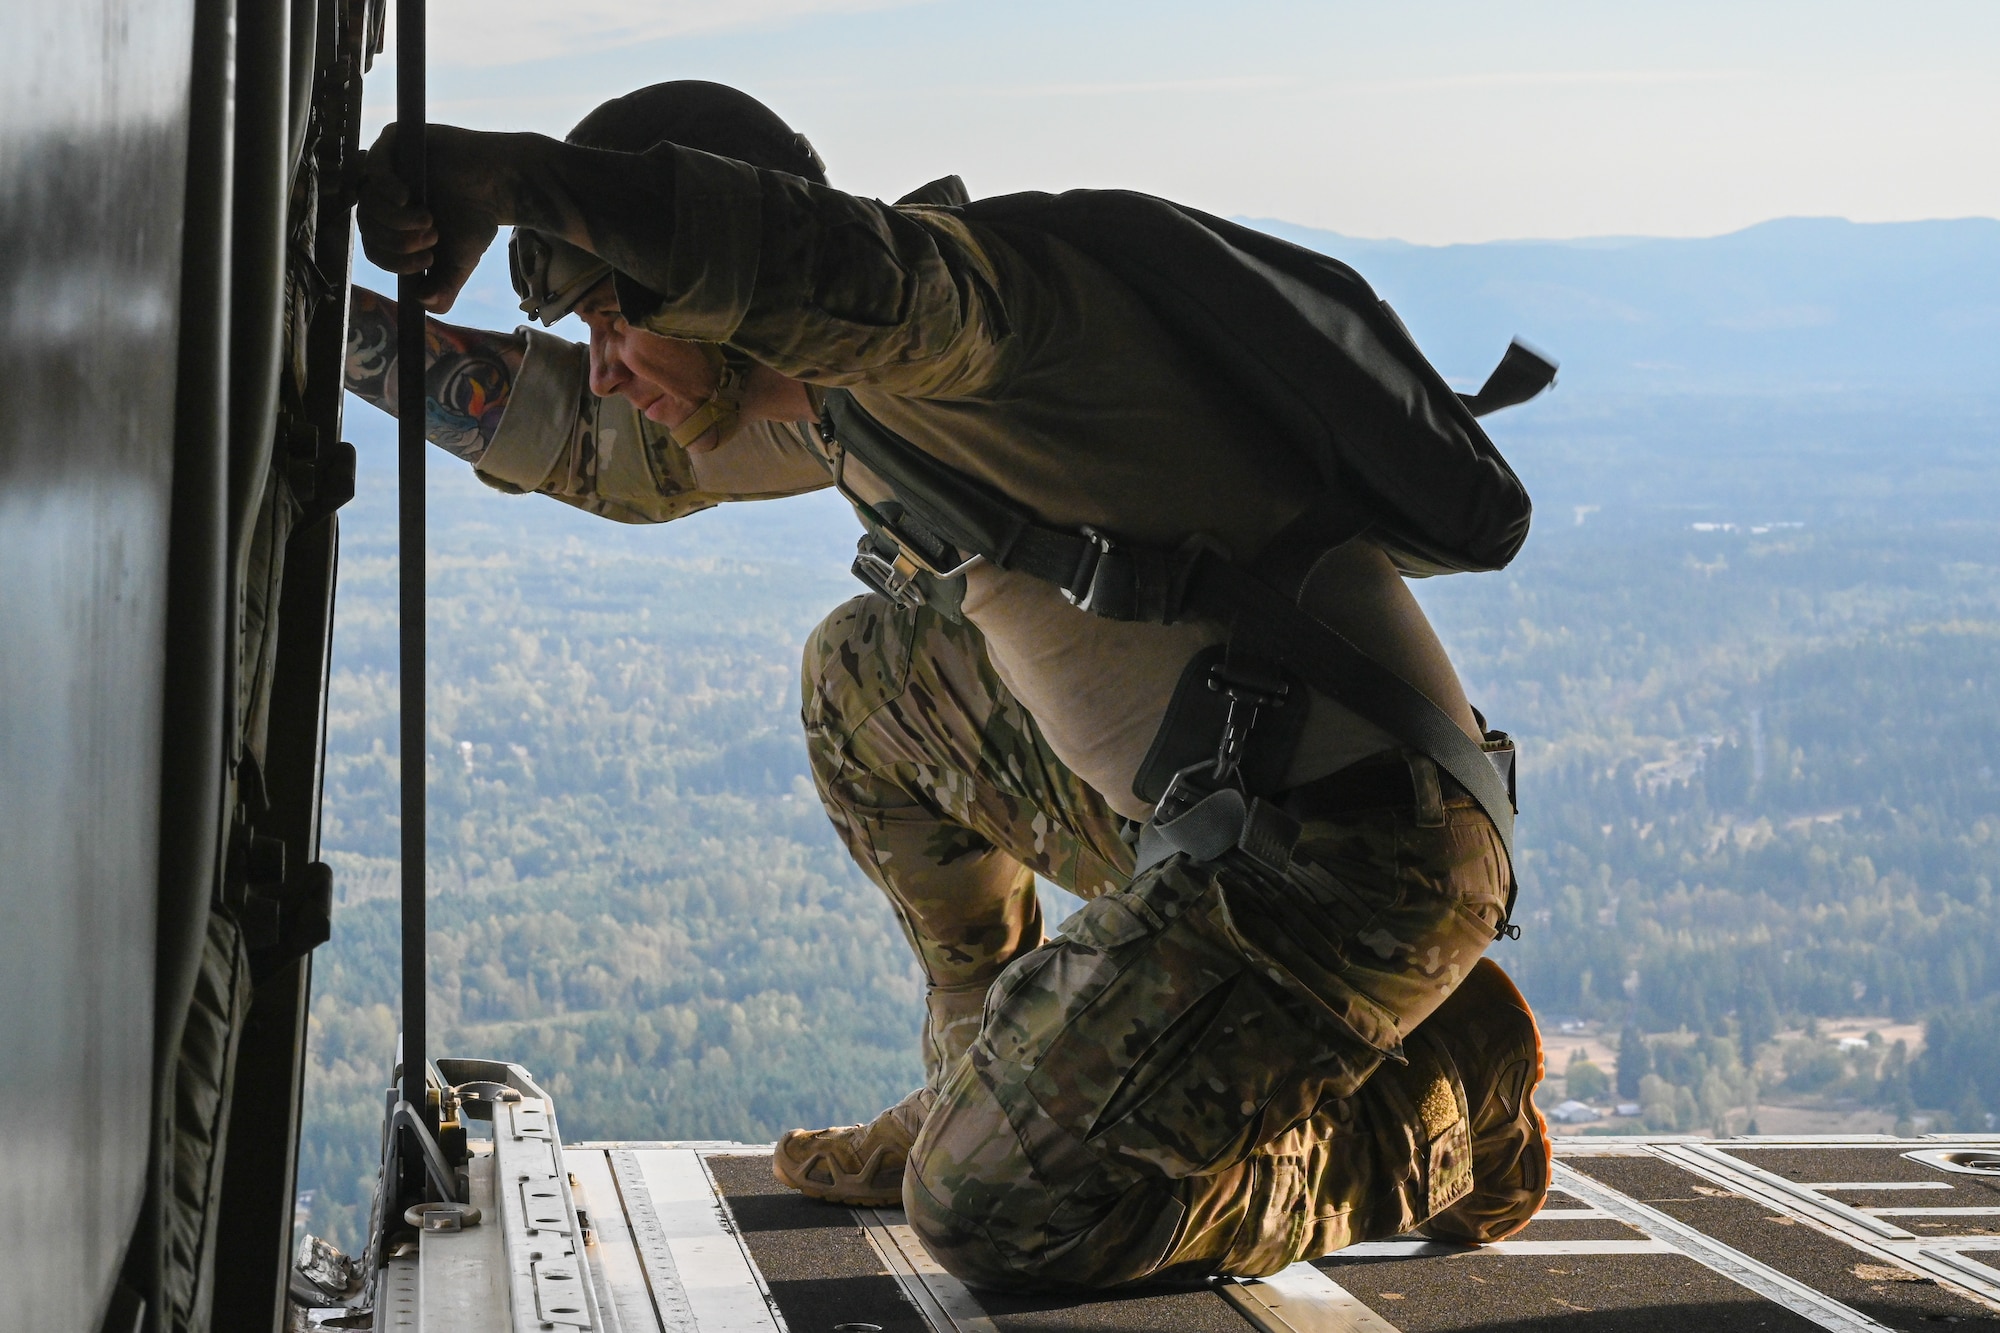 Paratrooper checks the views on a flying plane.